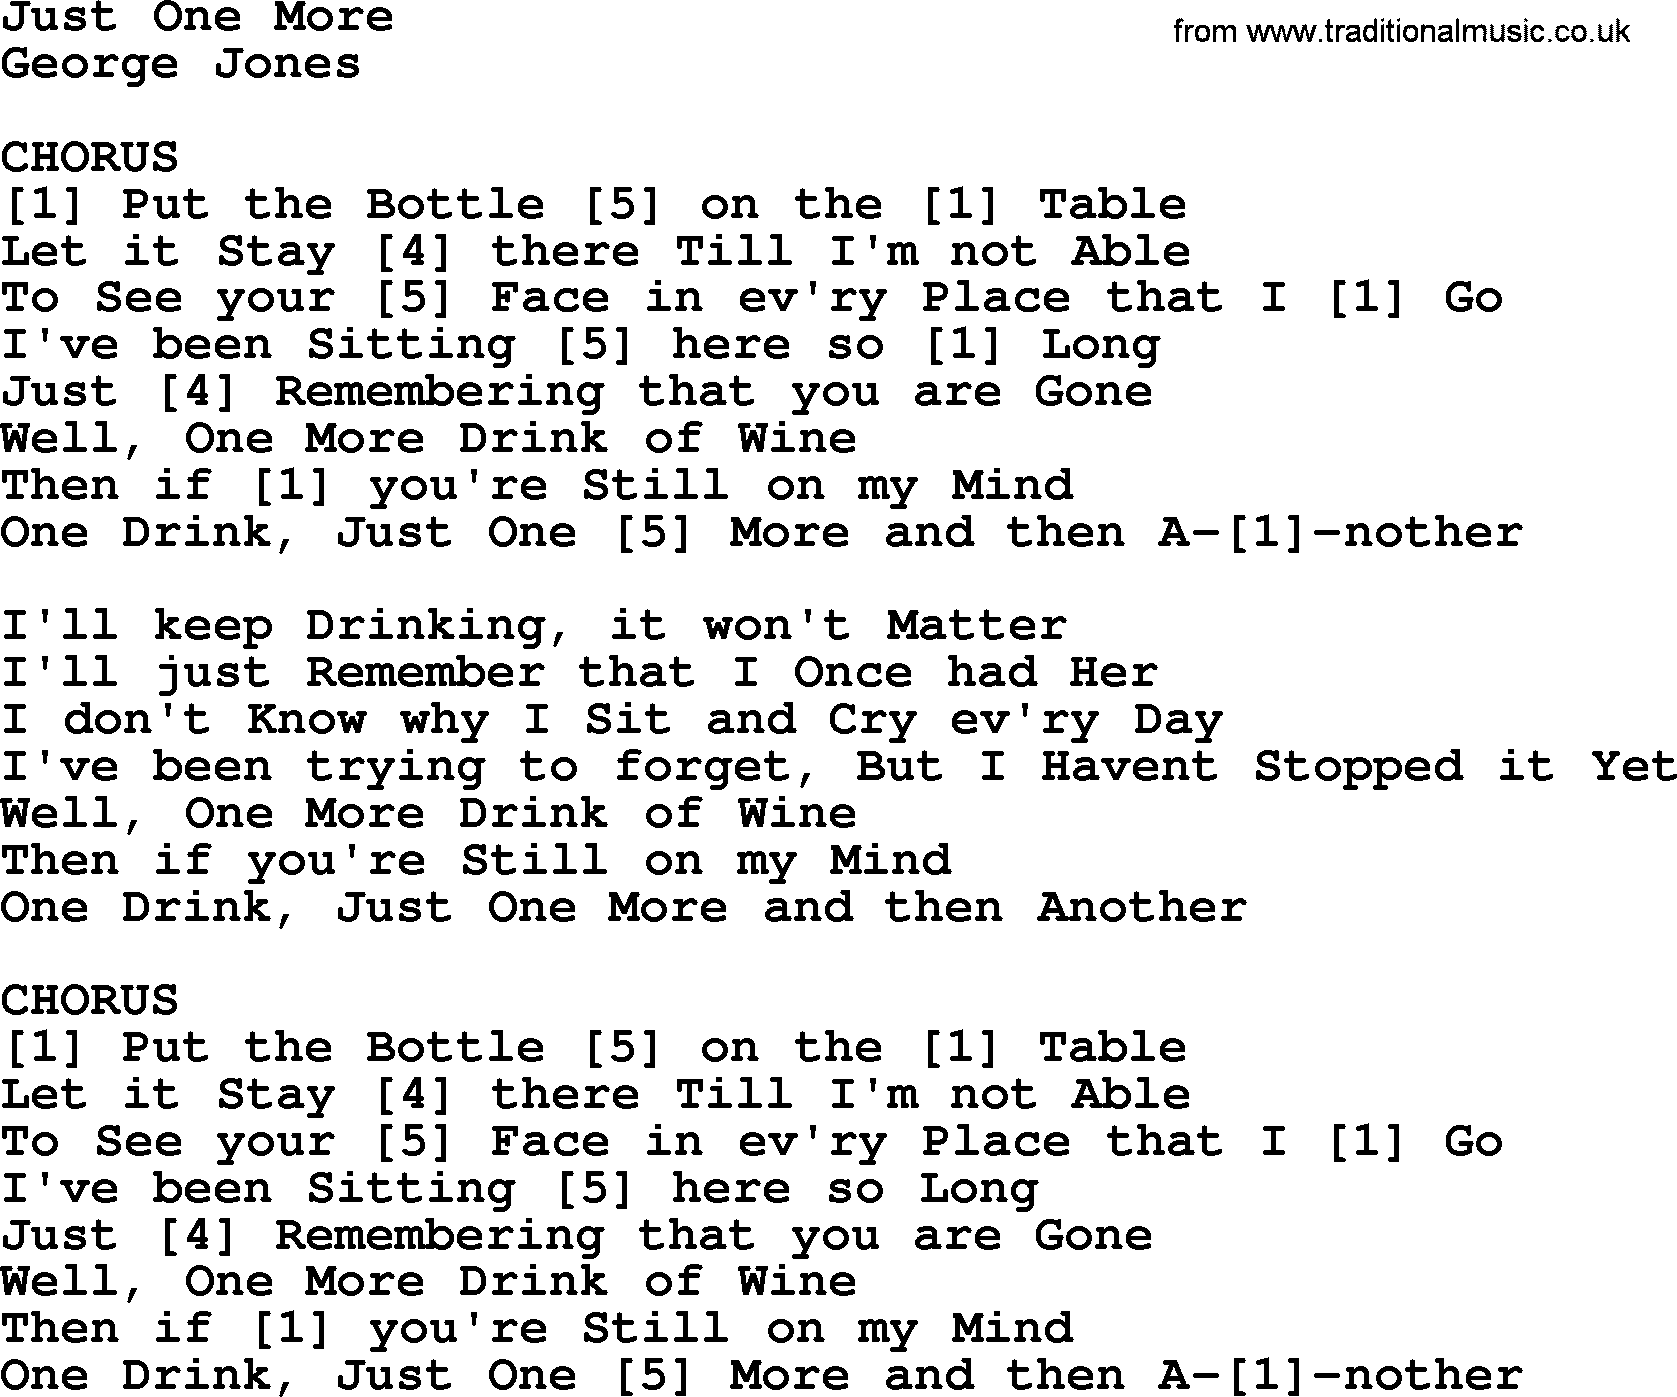 George Jones song: Just One More, lyrics and chords